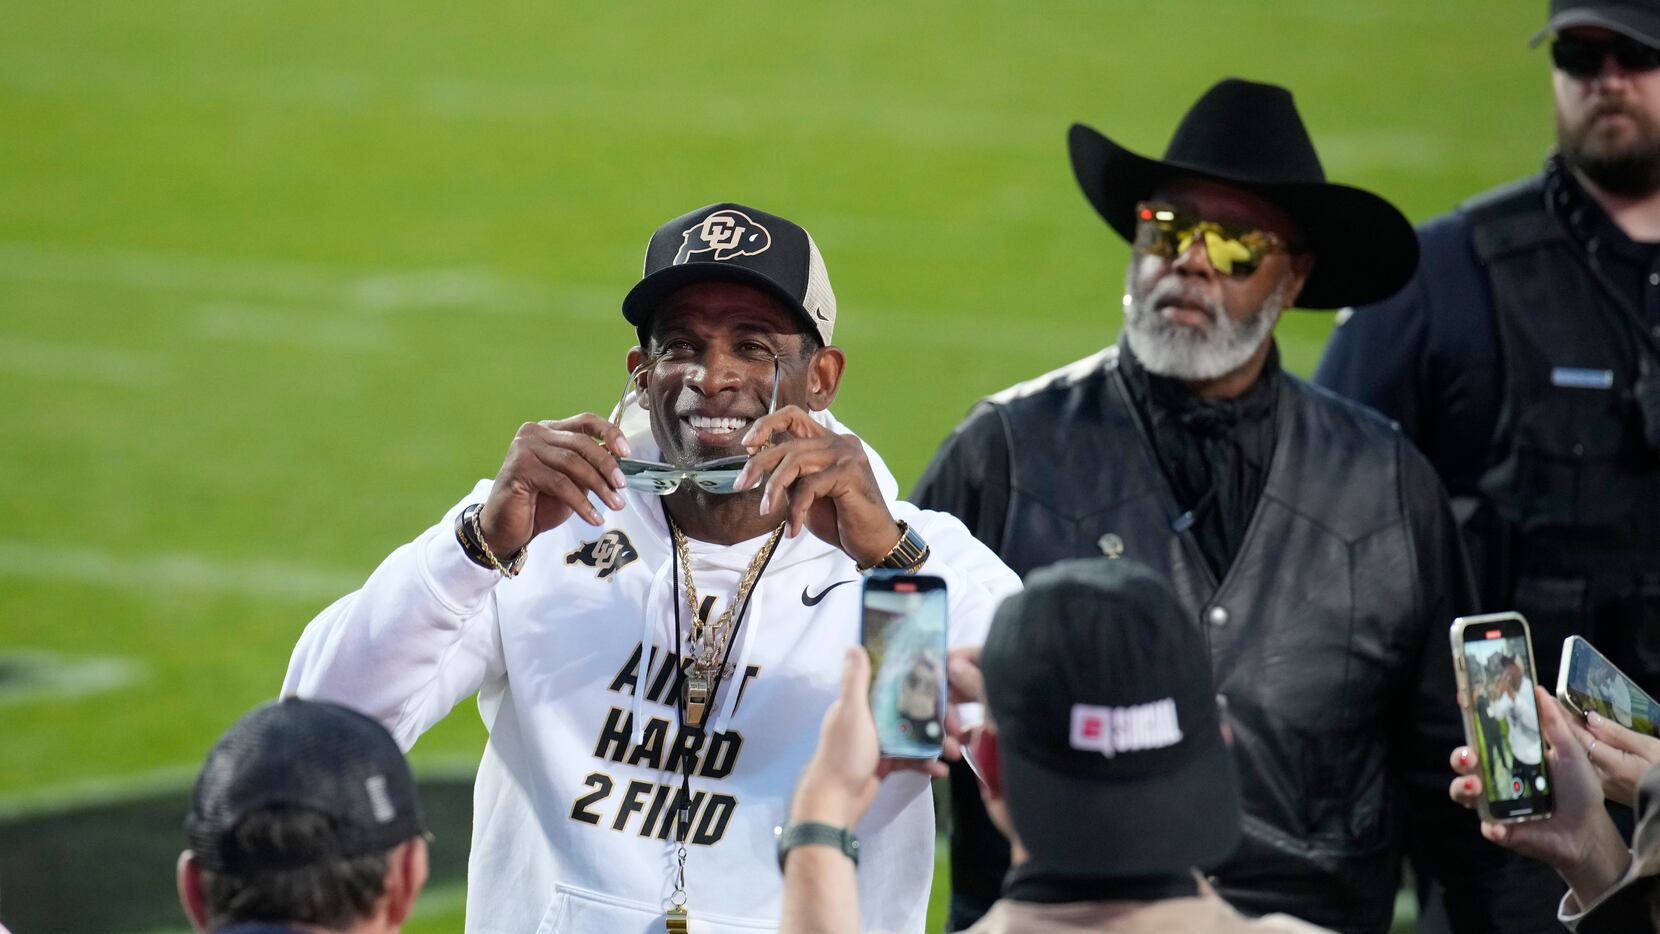 Opinion: Deion Sanders' game management needs some work - The